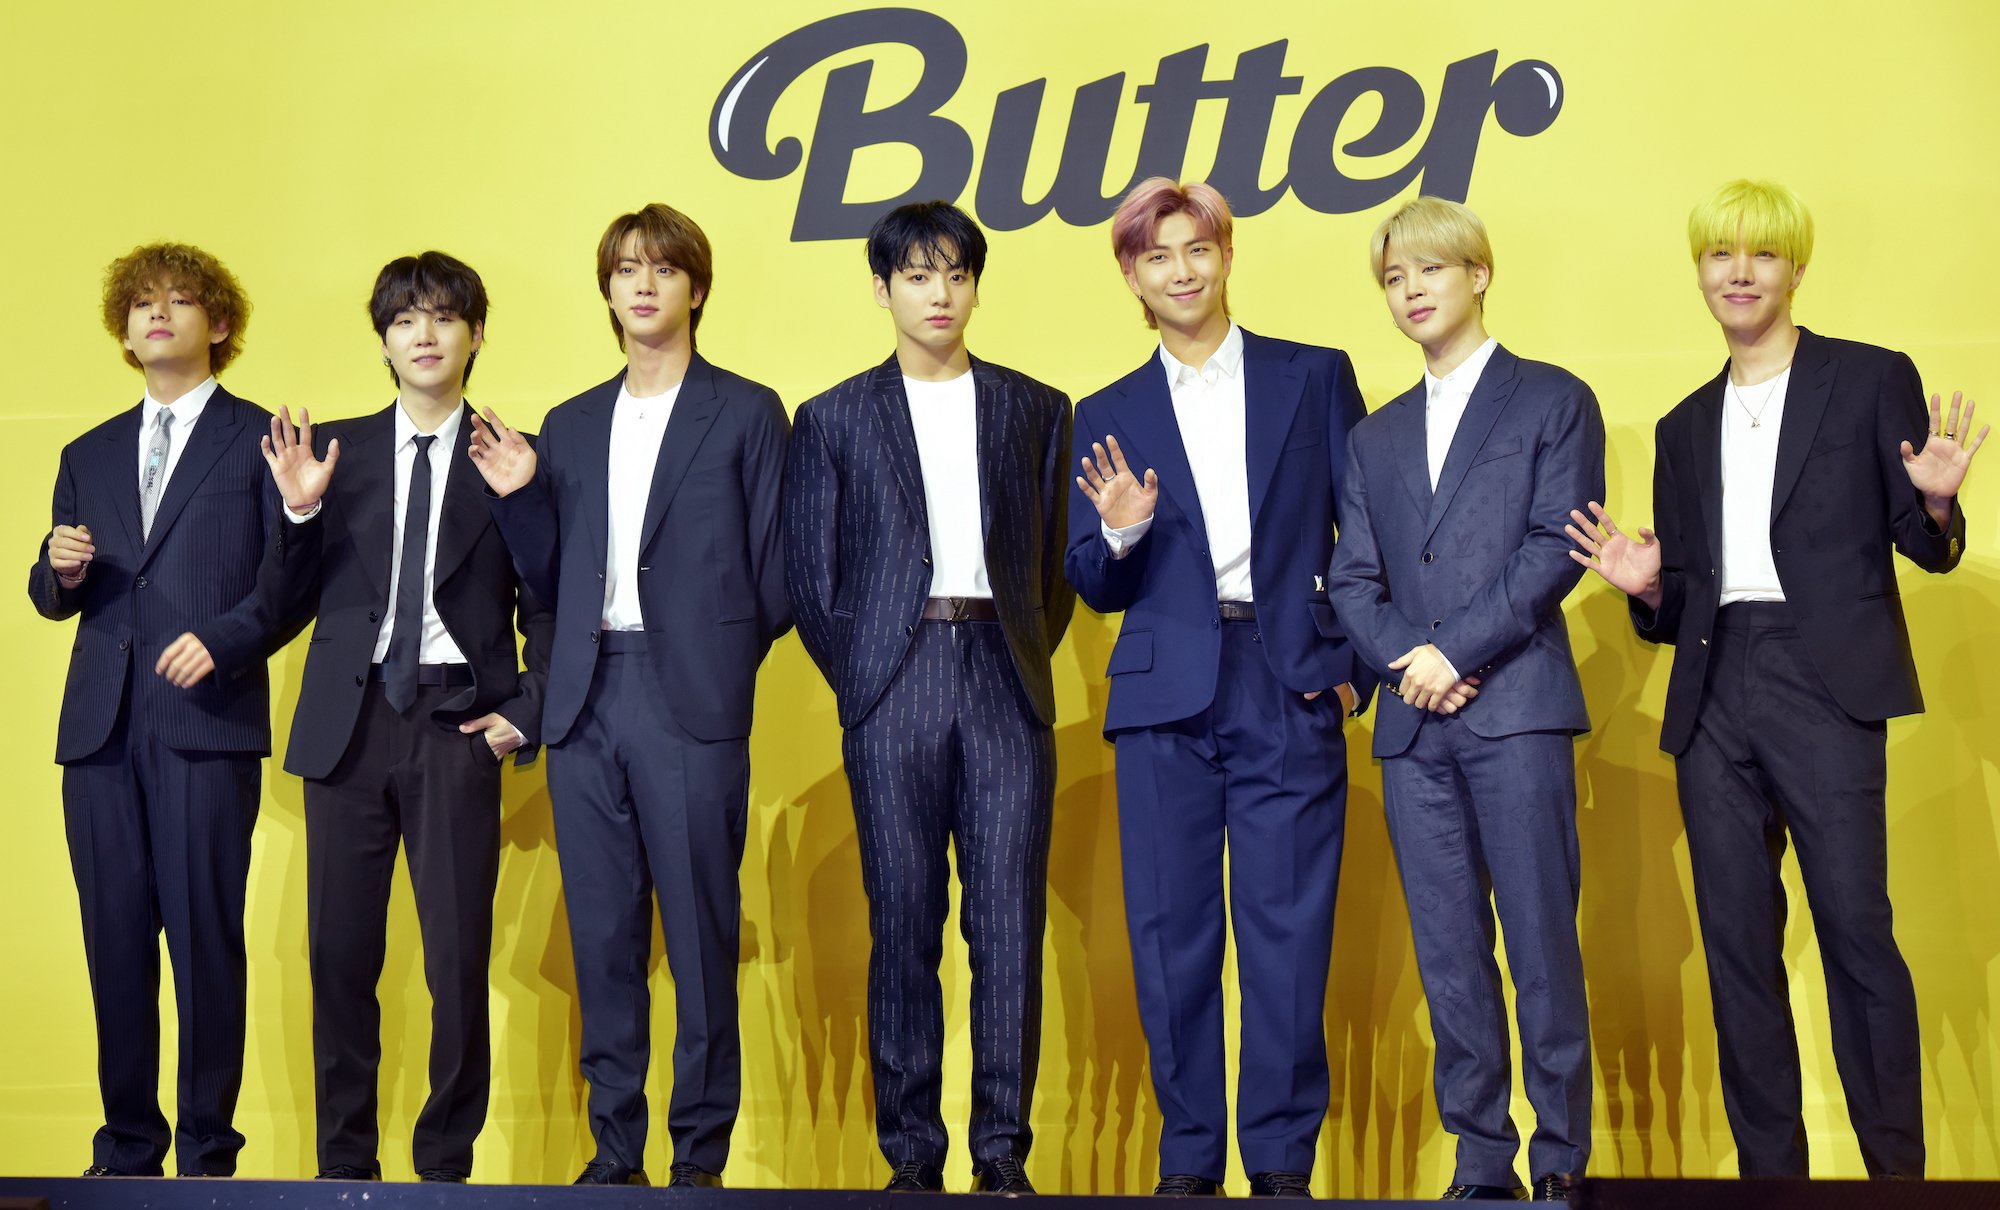 BTS attending a press conference for their digital single 'Butter' in May 2021